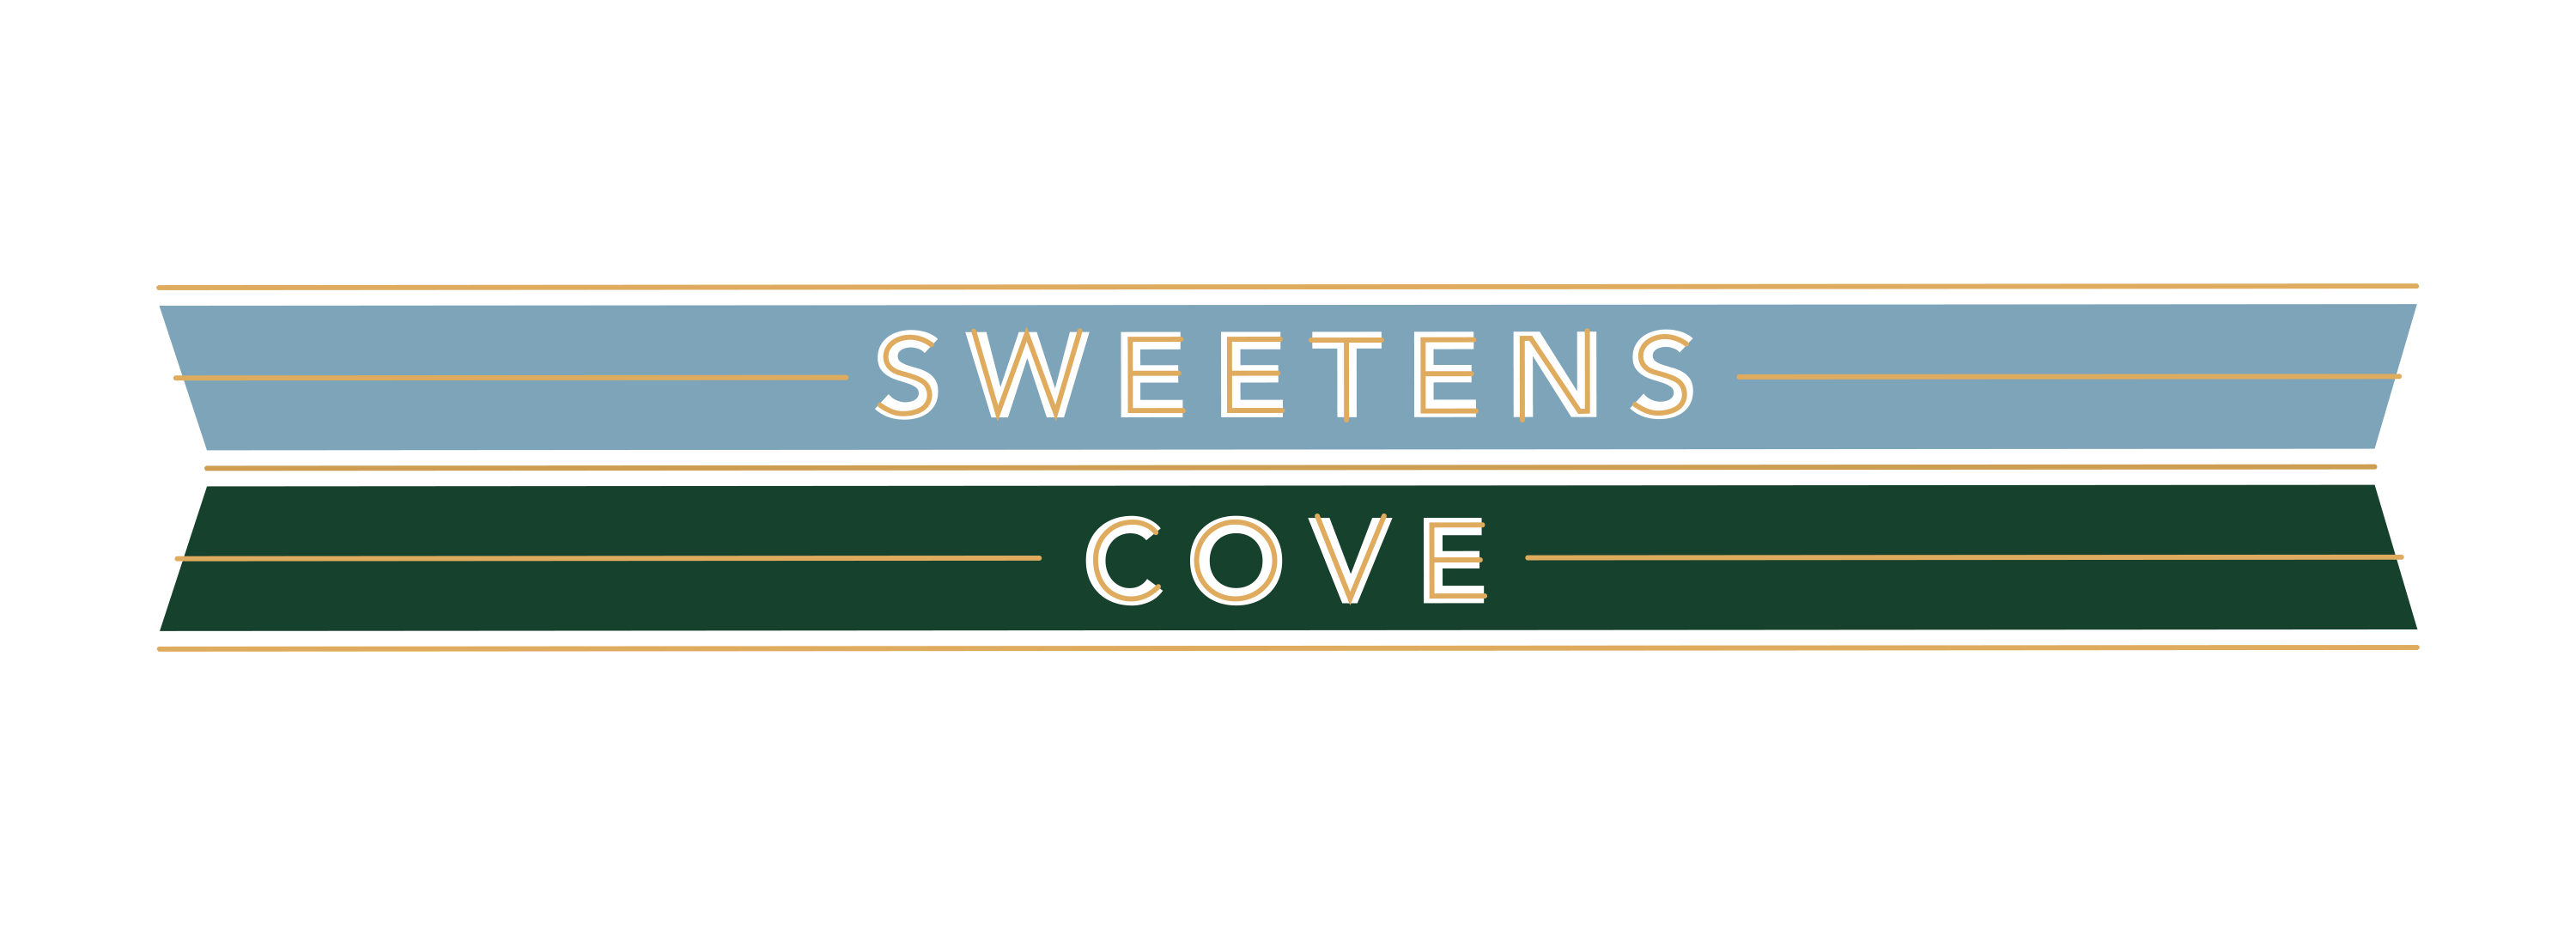 Sweetens Cove Tennessee Bourbon Whiskey Identity Design